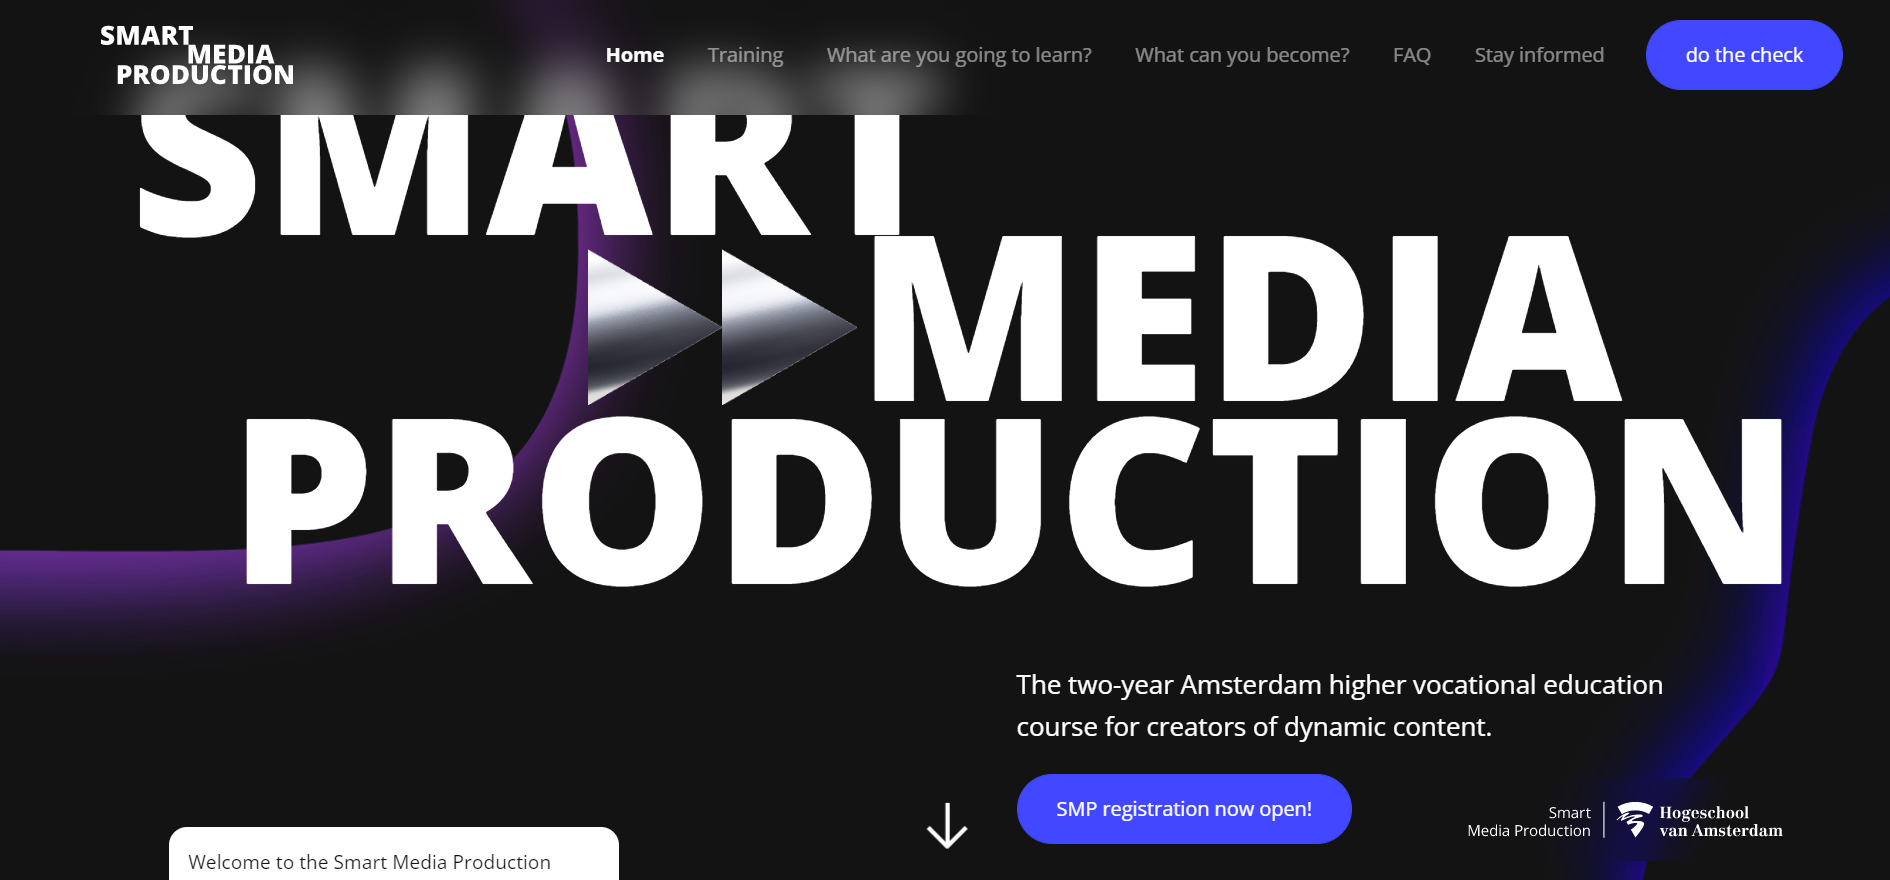 Landing page of Smart Media Production 